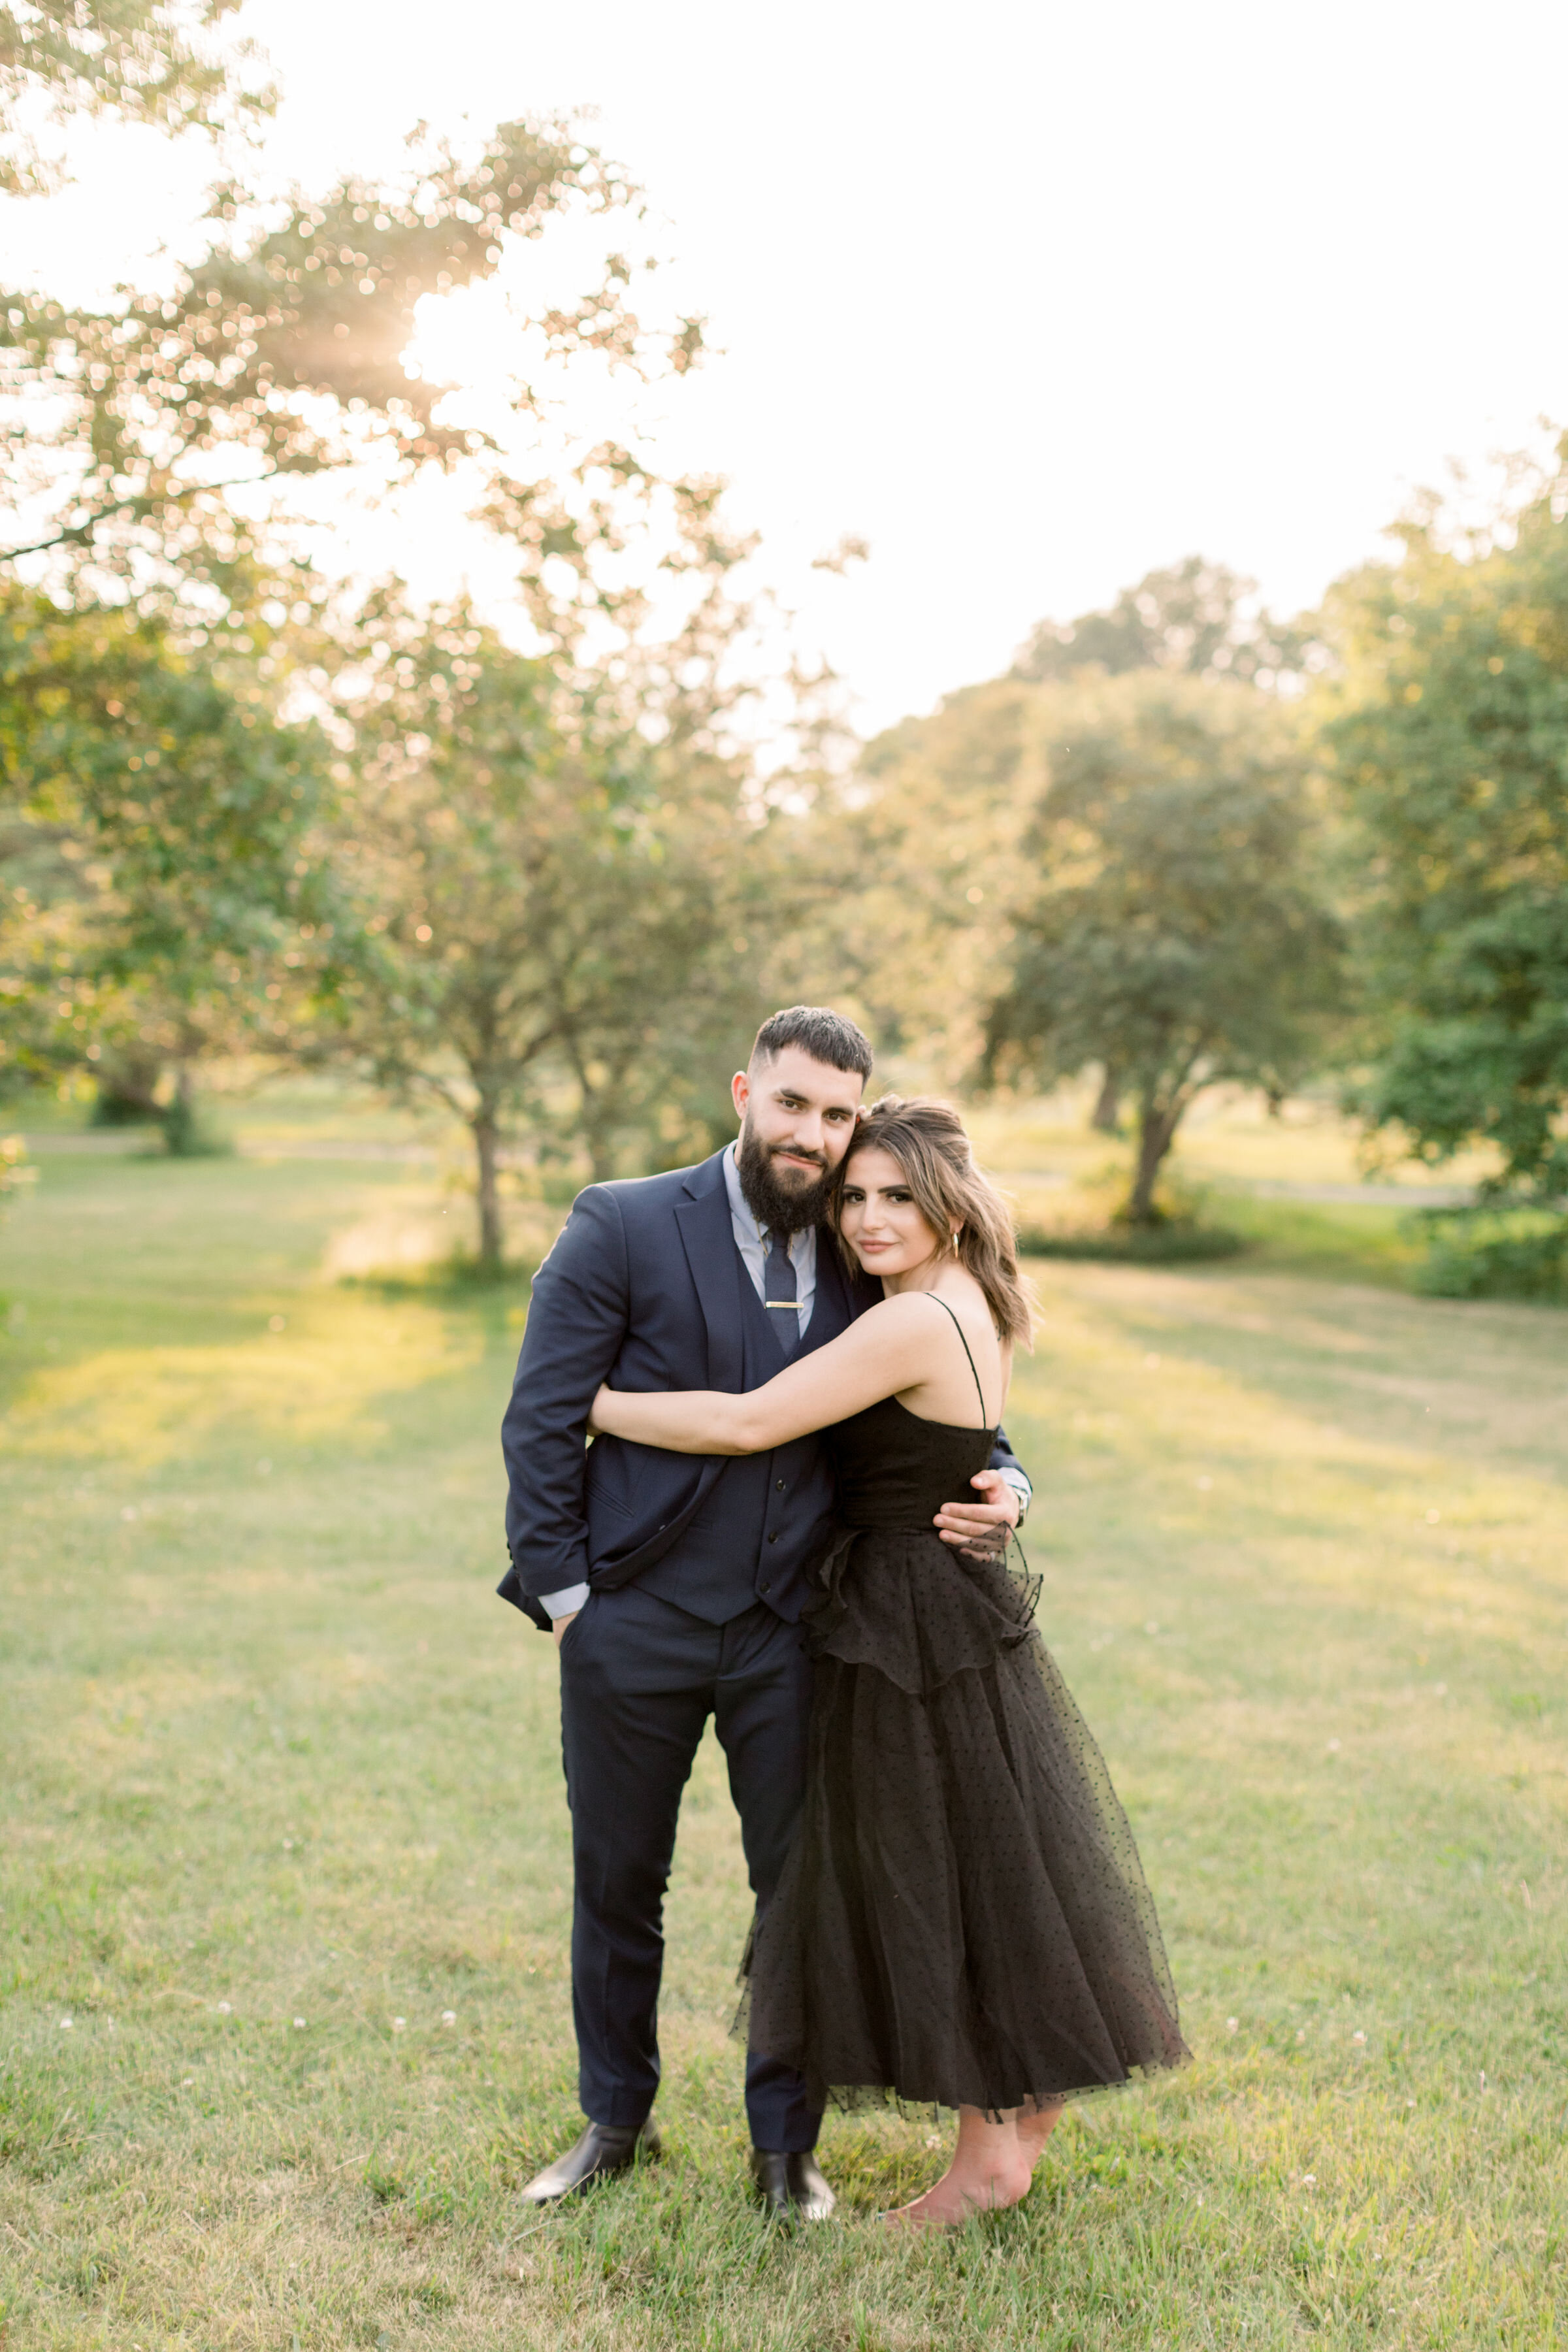  During this park engagement session in Ottawa, Canada, Chelsea Mason photography captures this formally dressed engaged couple lovingly embracing during this session. engaged couple embracing poses Ottawa Ontario couples photographer #ChelseaMasonPh